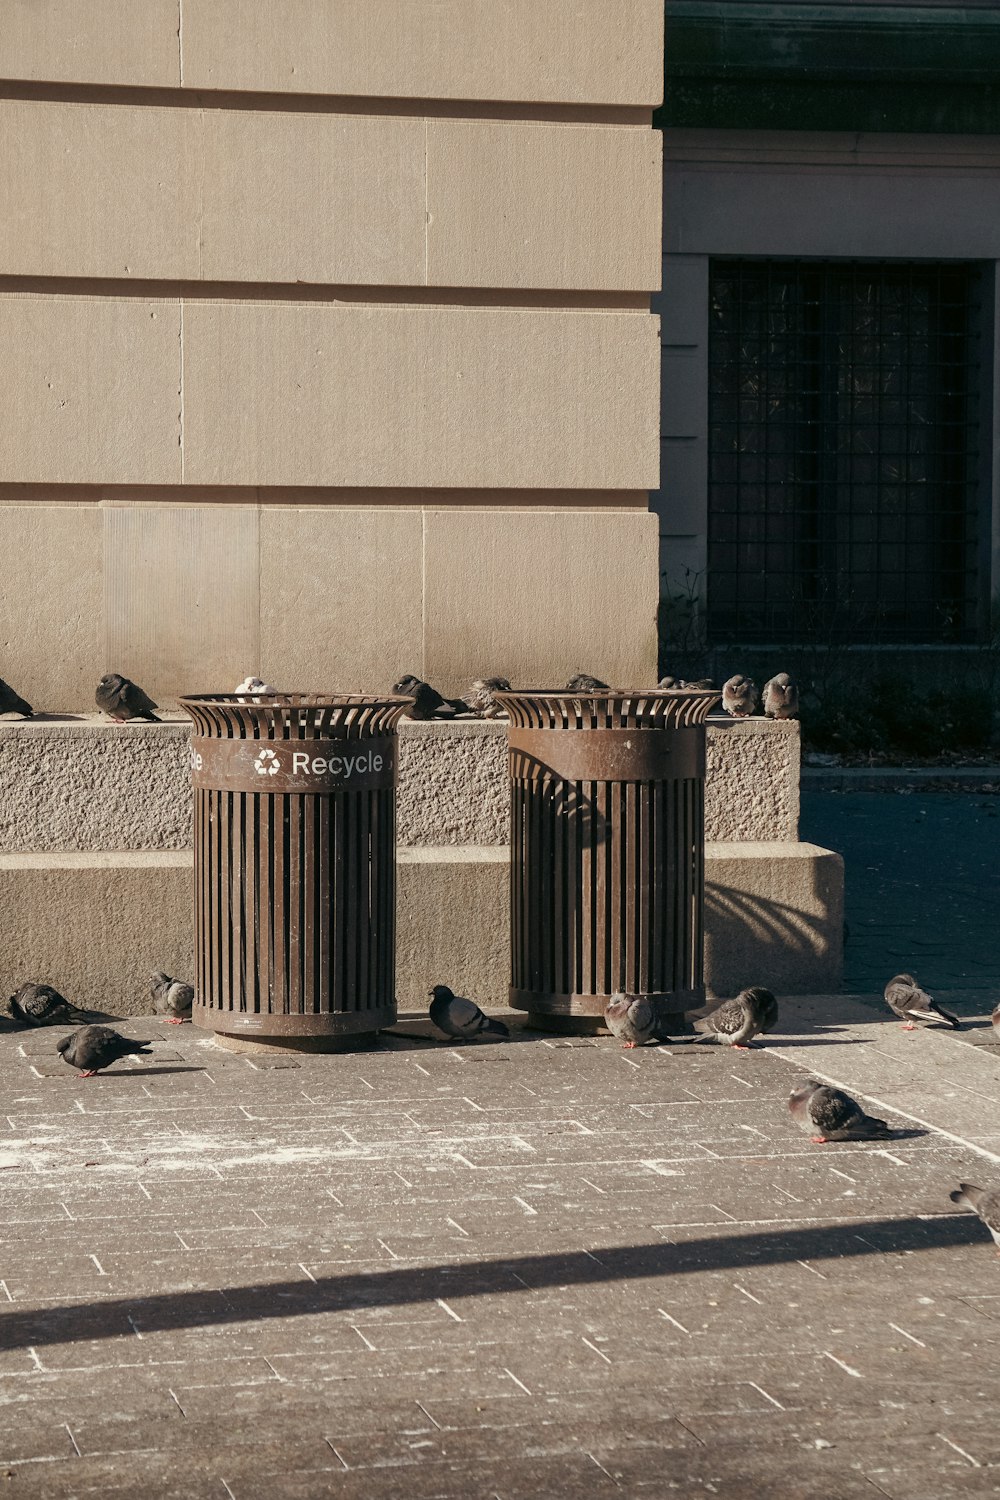 a group of birds sitting on top of trash cans